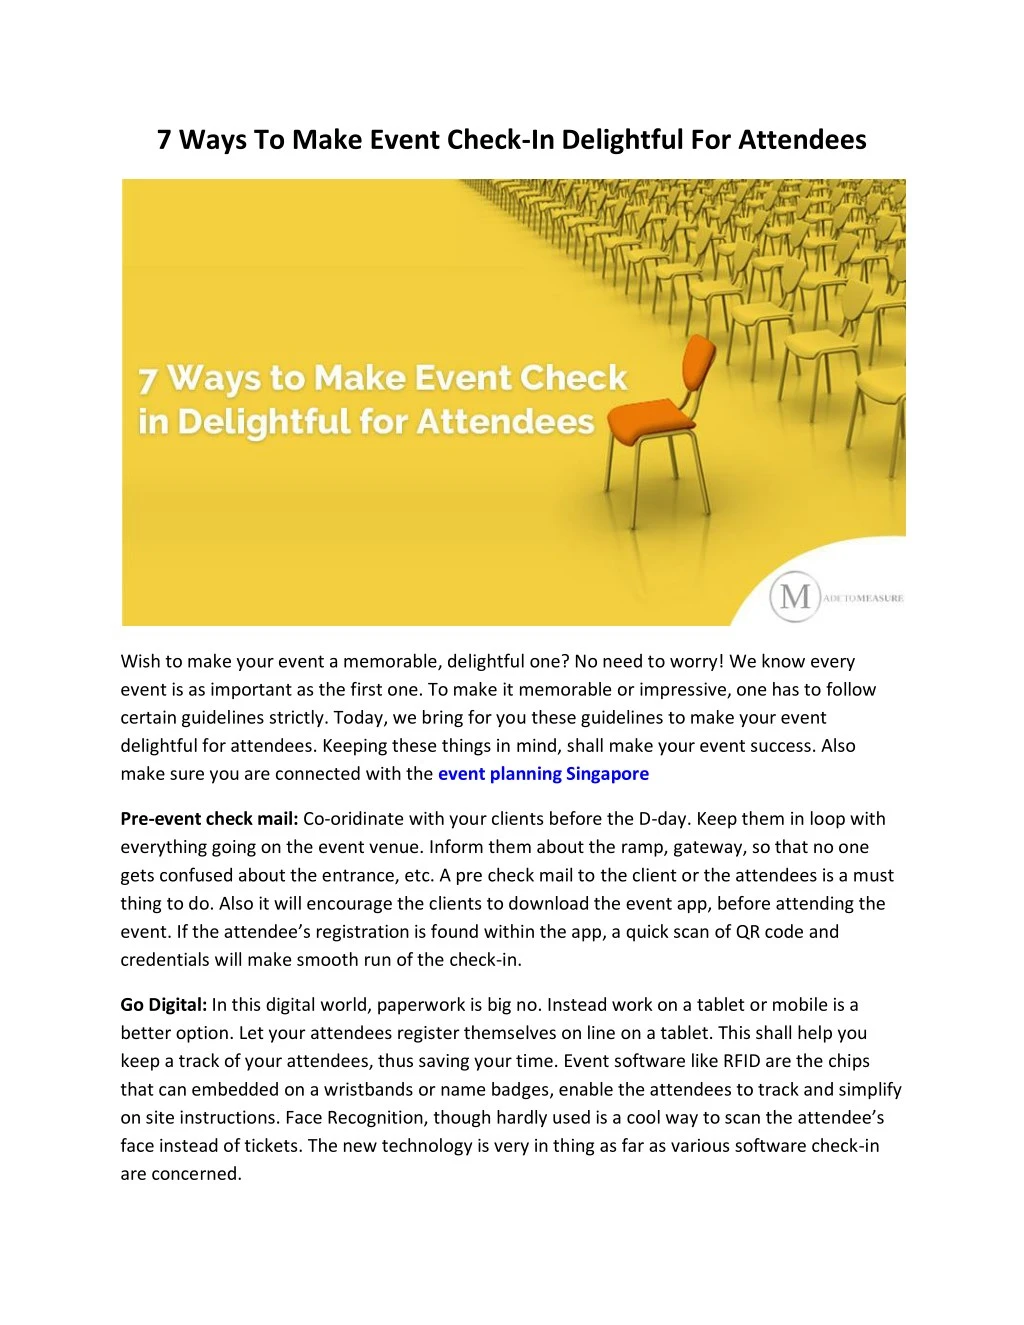 7 ways to make event check in delightful